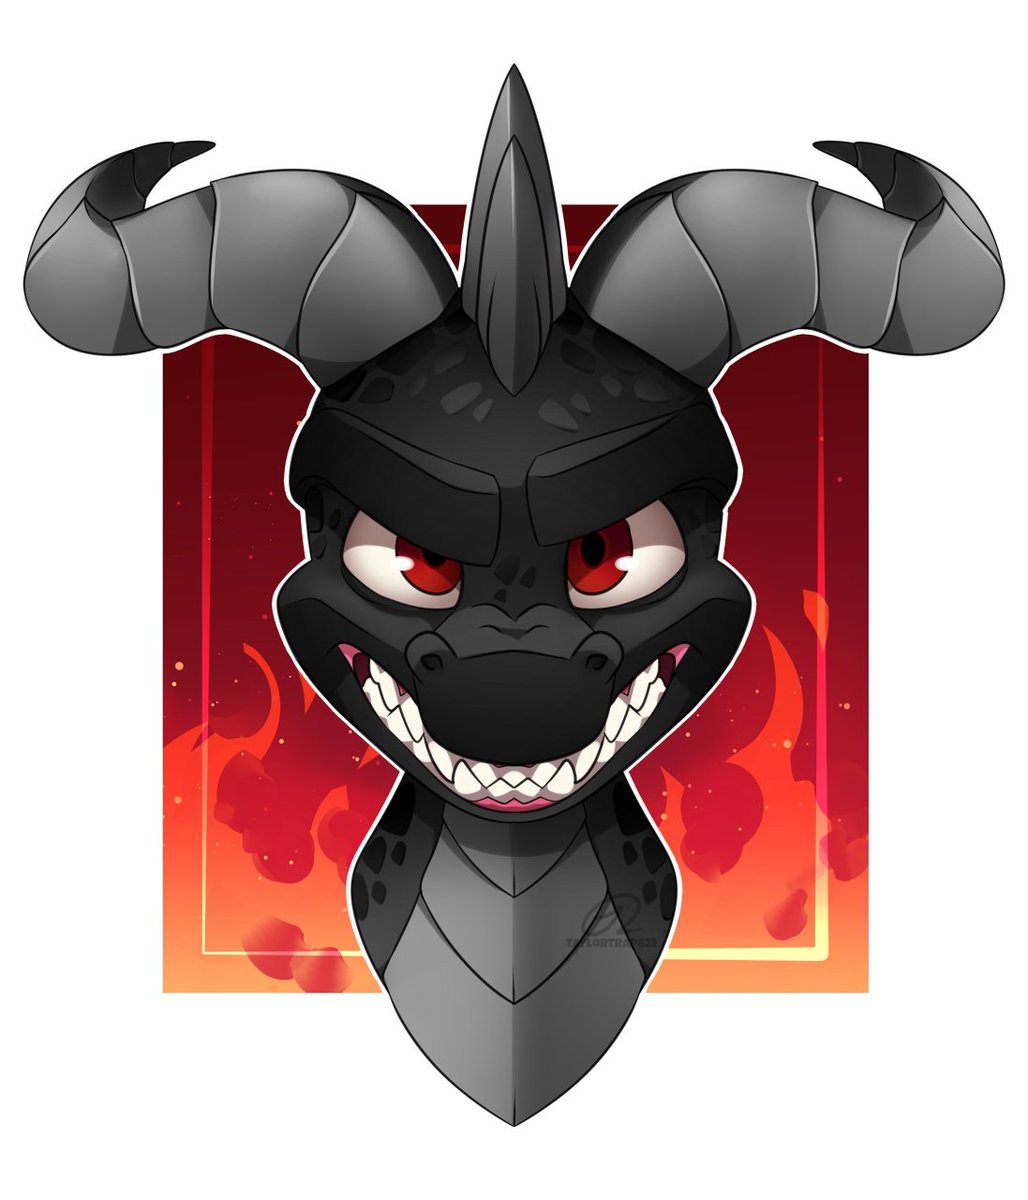 Portrait commission for @LaggyModem of Spyro (or Dark Spyro?) with unique horns upon request. 🔥